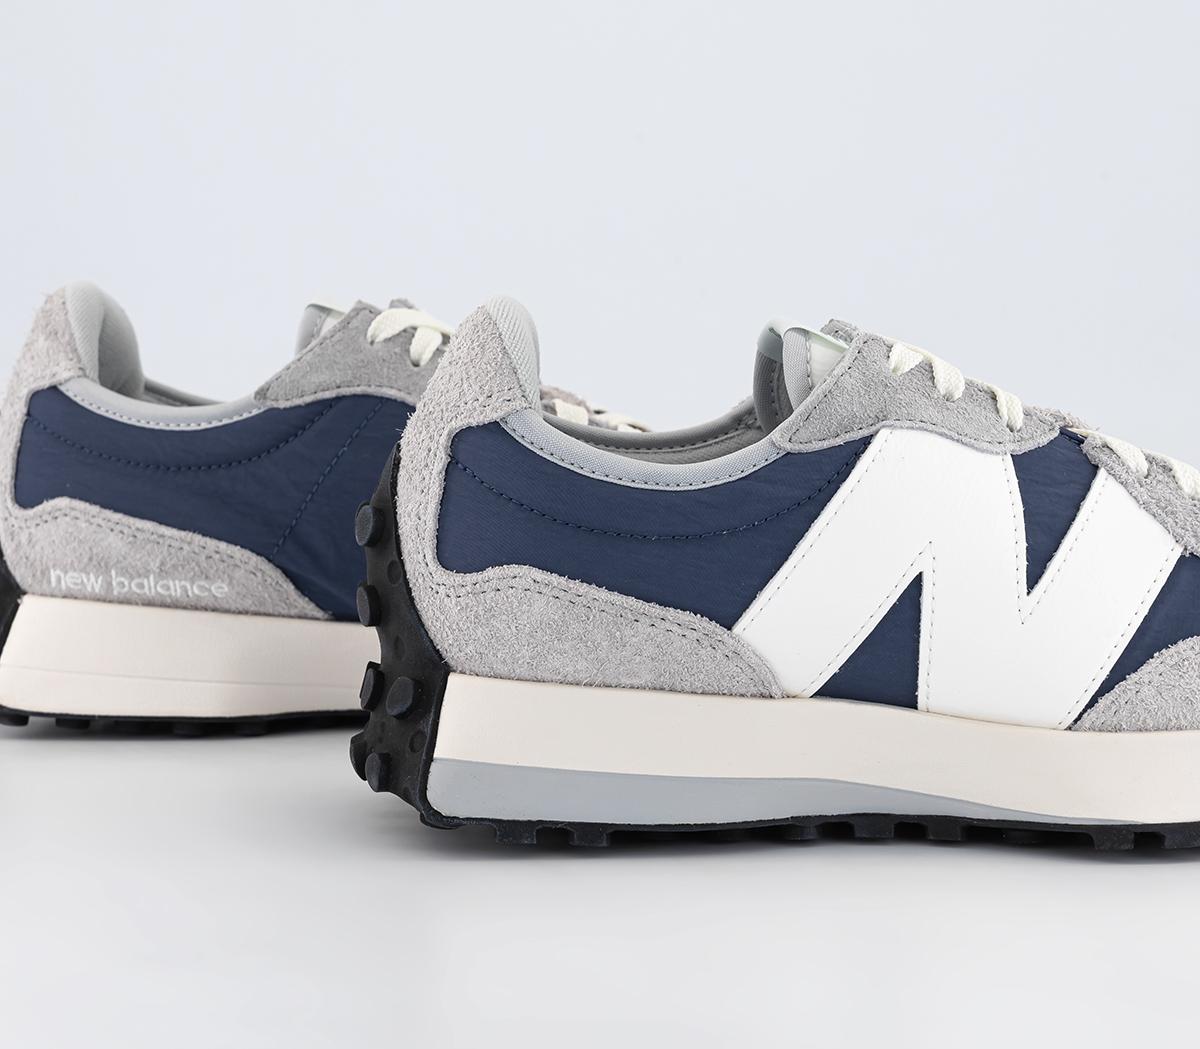 New Balance 327 Trainers Navy White Grey Black - Men's Trainers